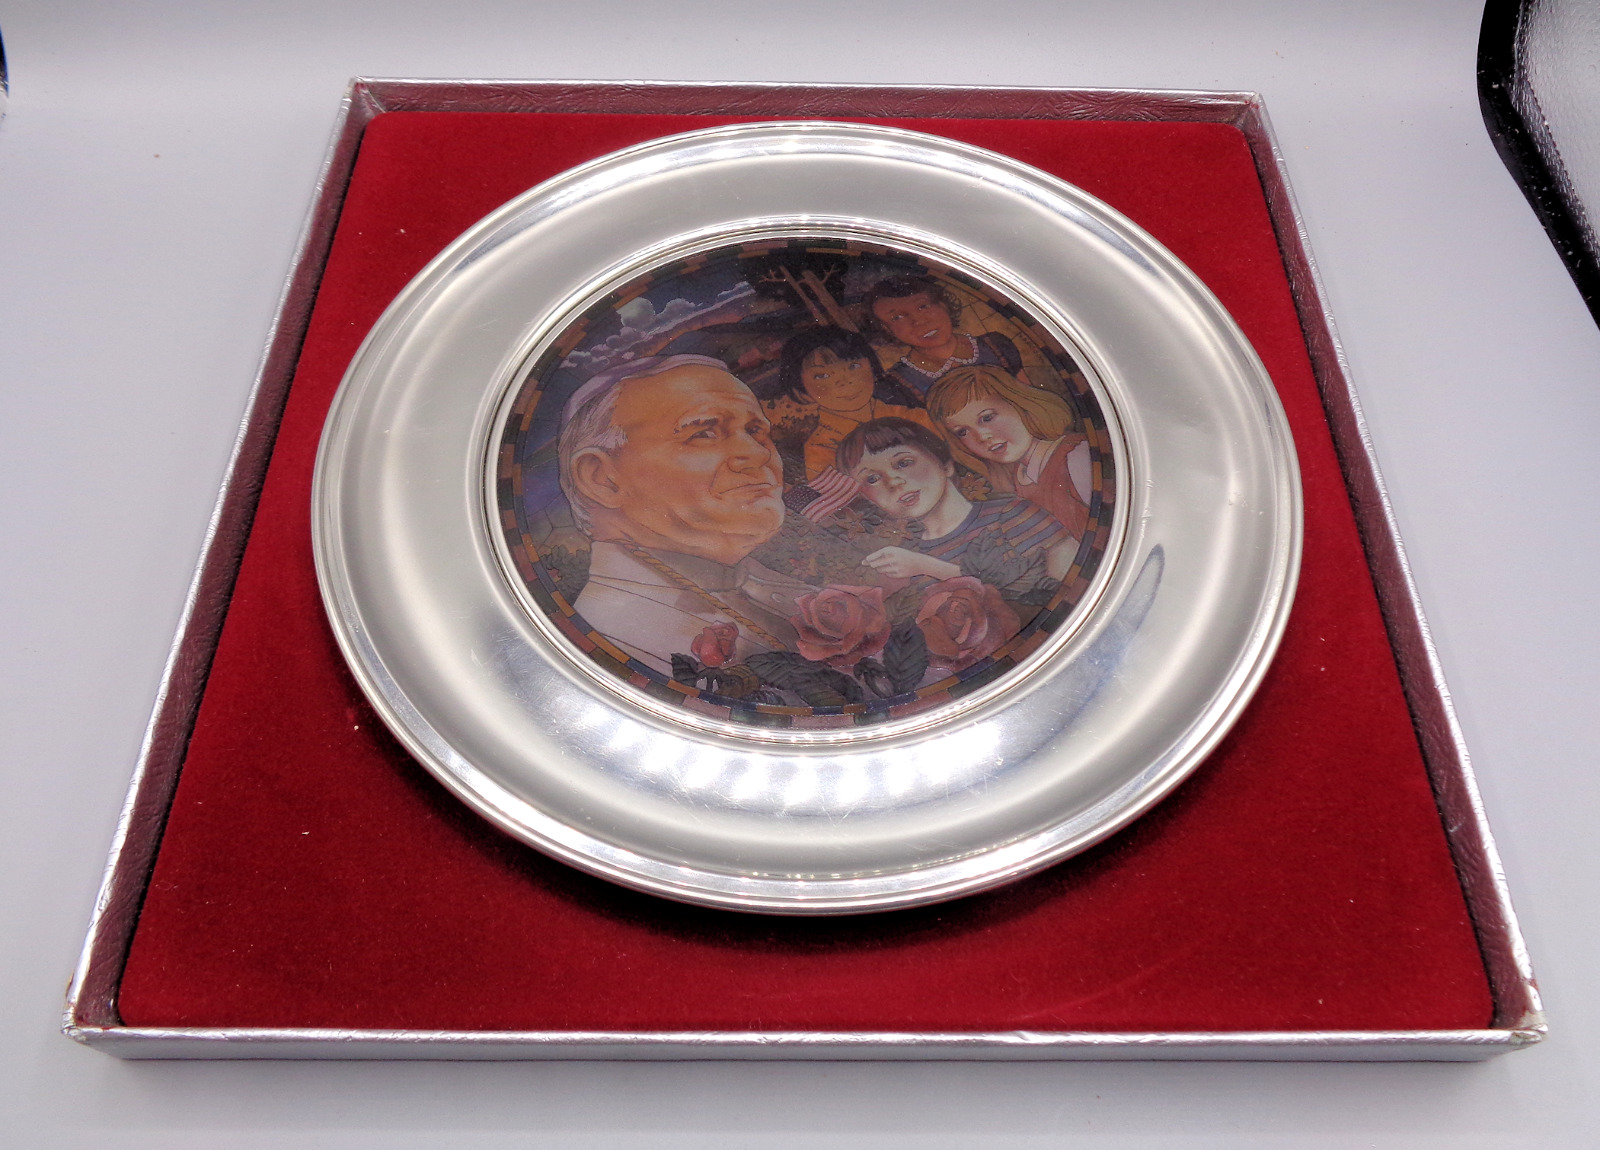 US HISTORICAL SOCIETY 1987 PAPAL VISIT PEWTER PLATE WITH BOX